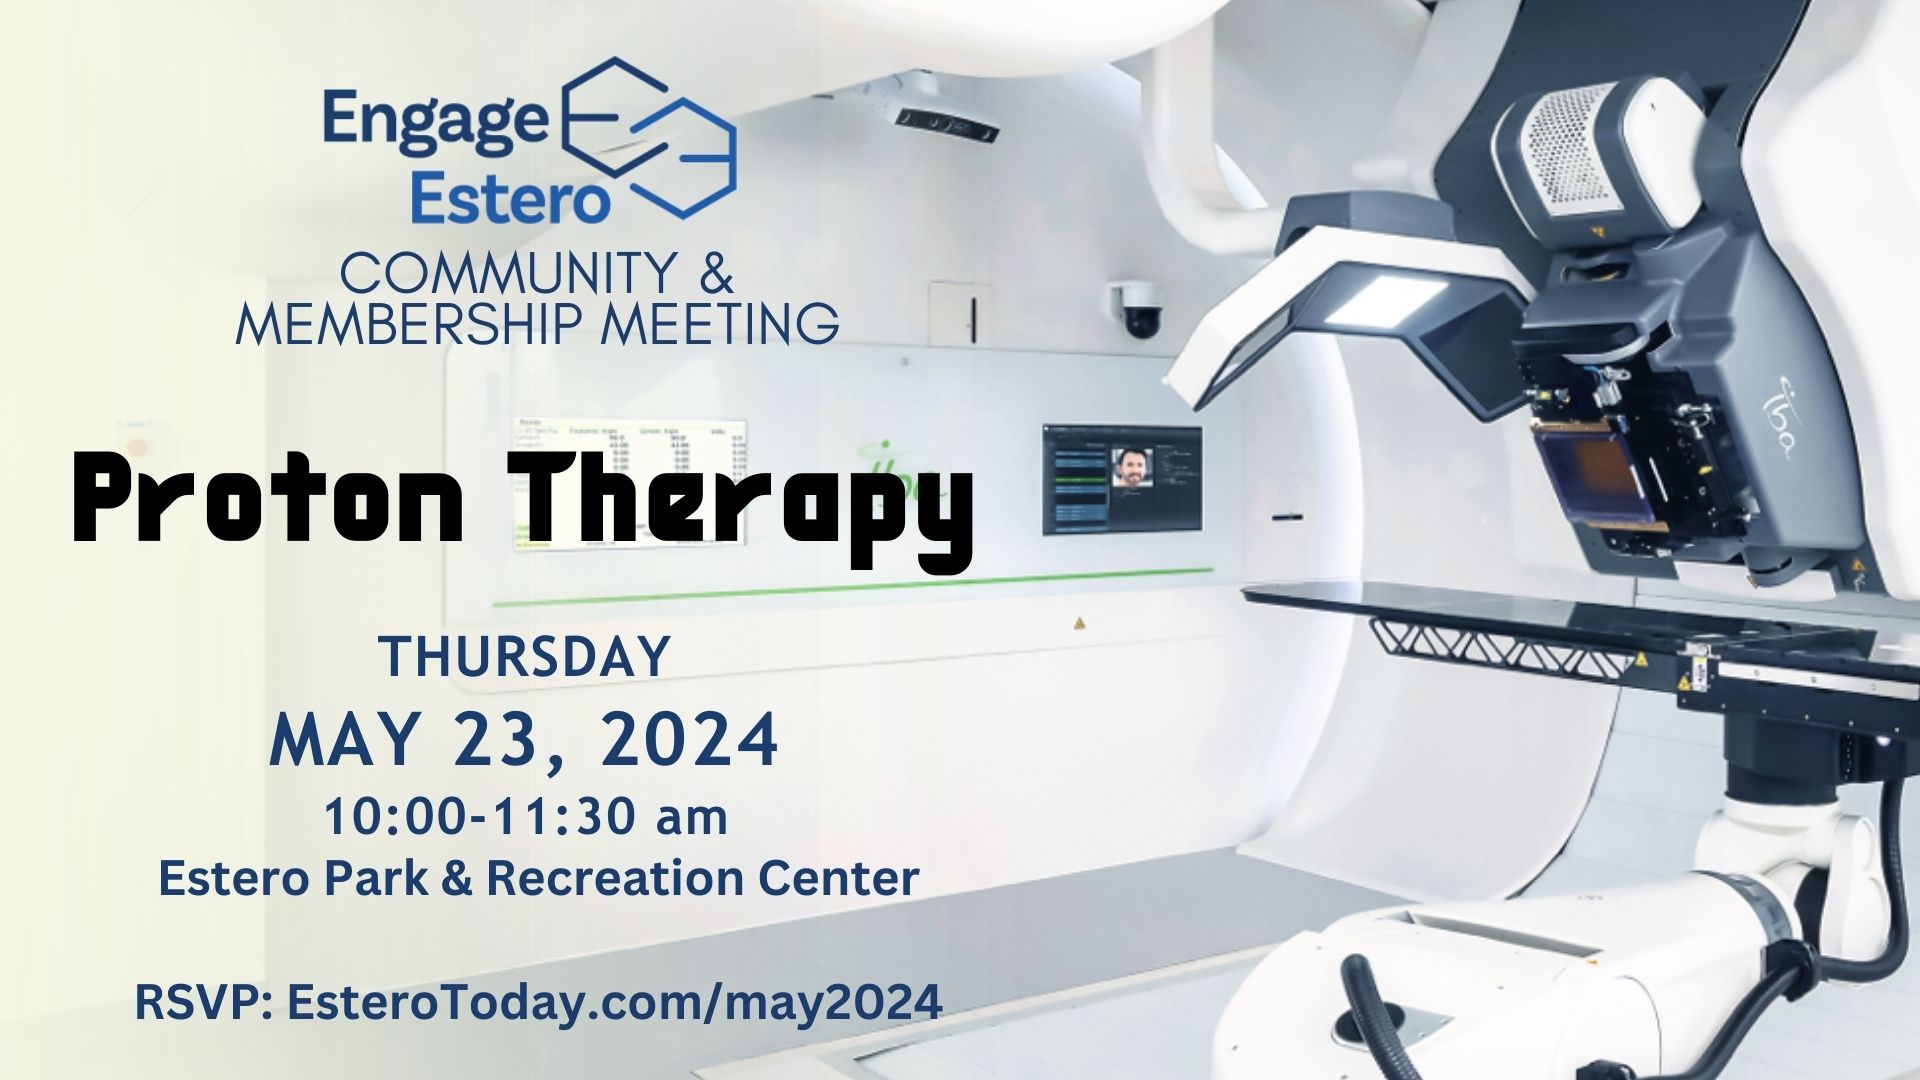 Proton Therapy for Cancer in Estero: May Community & Membership Meeting